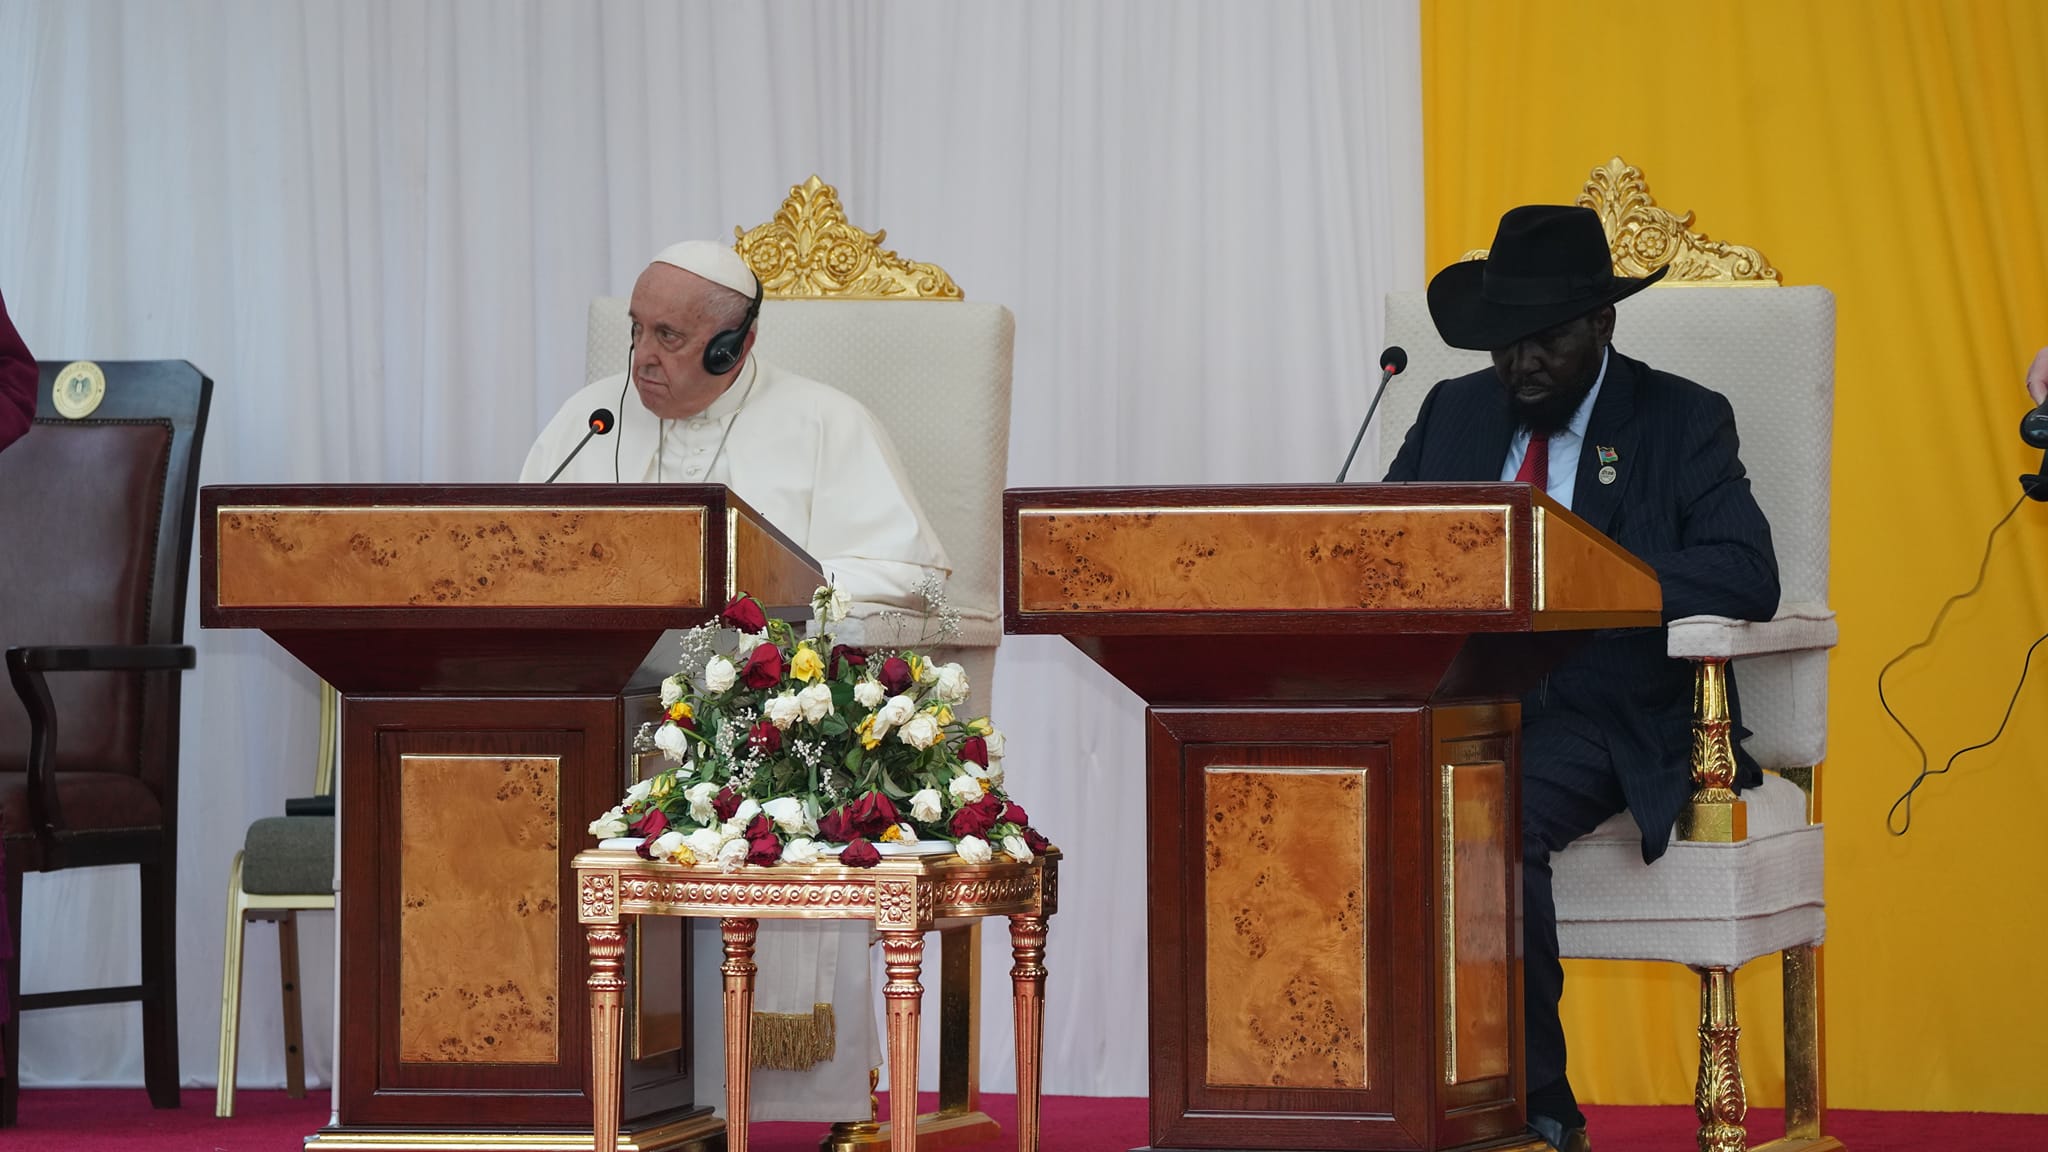 Pope says “enough of suffering” in a speech at State House